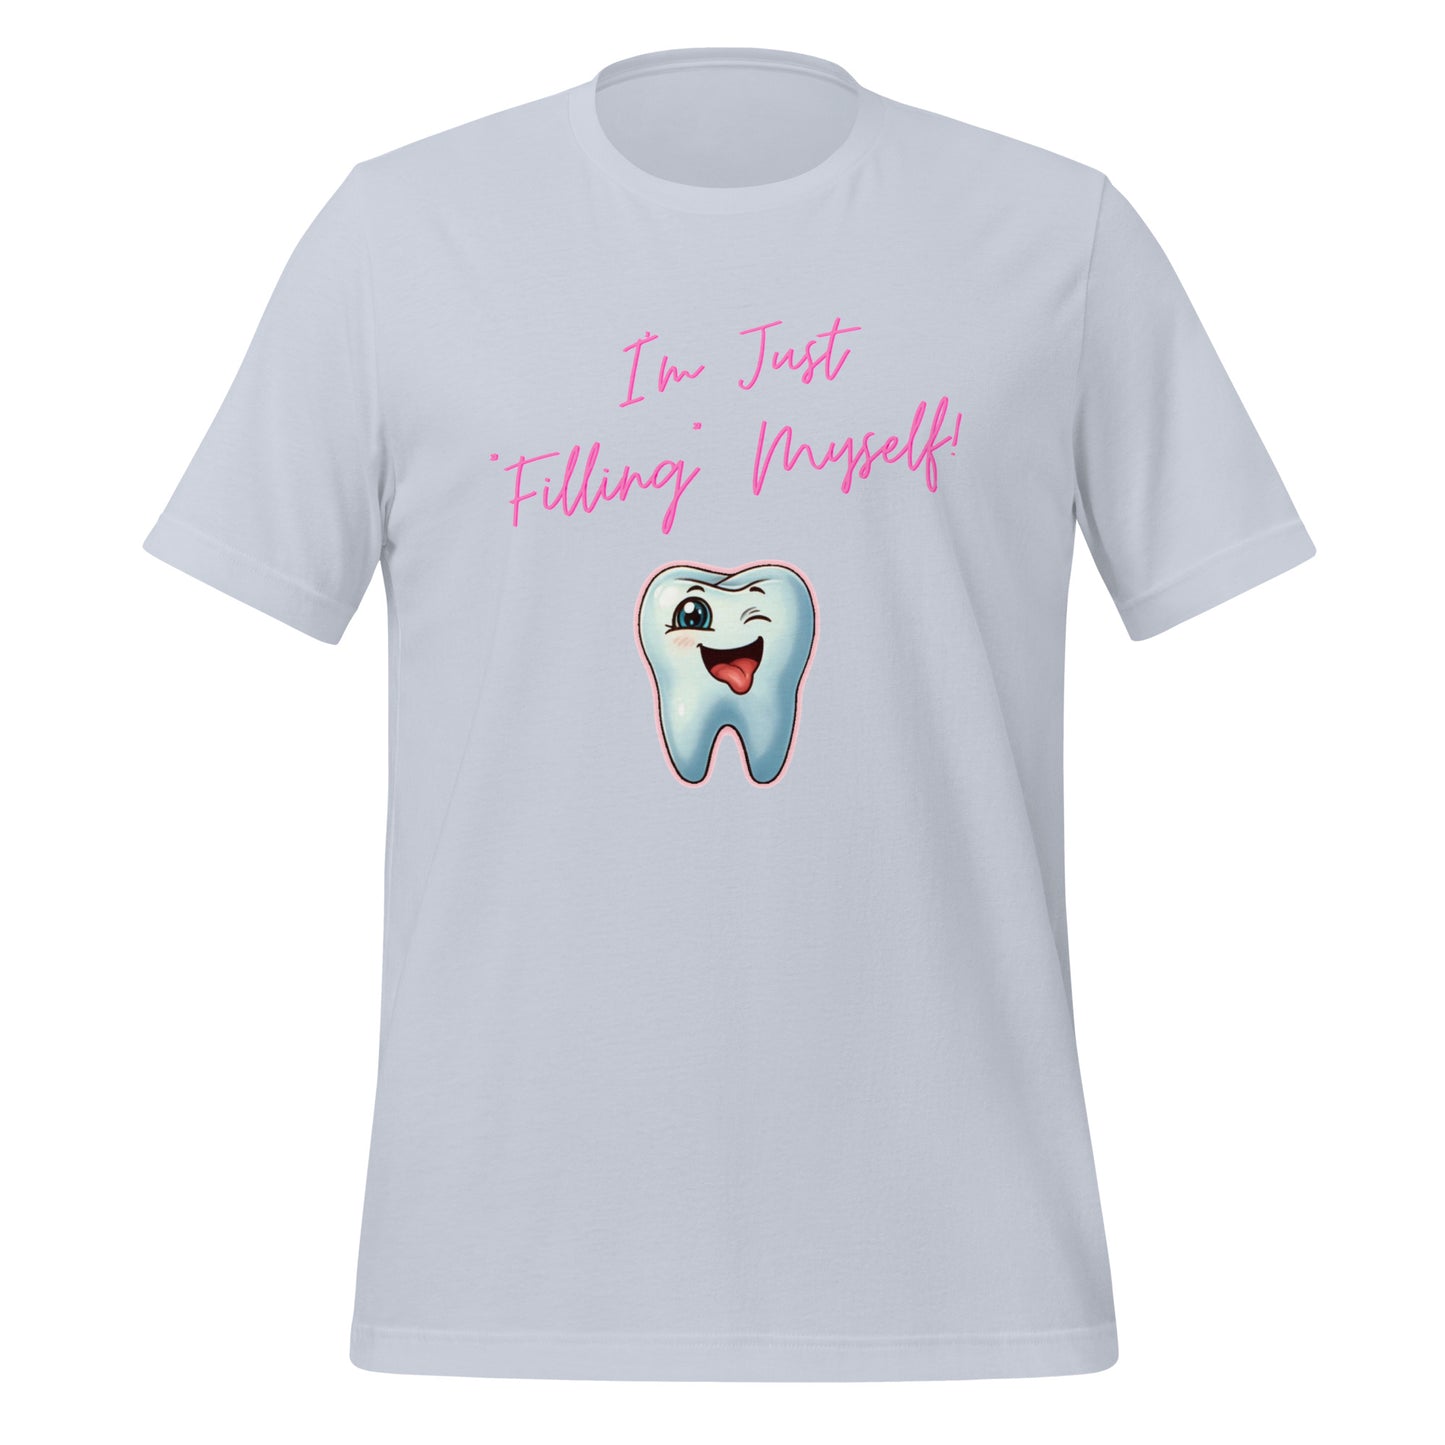 Flirtatious winking cartoon tooth character with the phrase "I'm just filling myself!" Ideal for a funny dental t-shirt or a cute dental assistant shirt. Light blue color. 